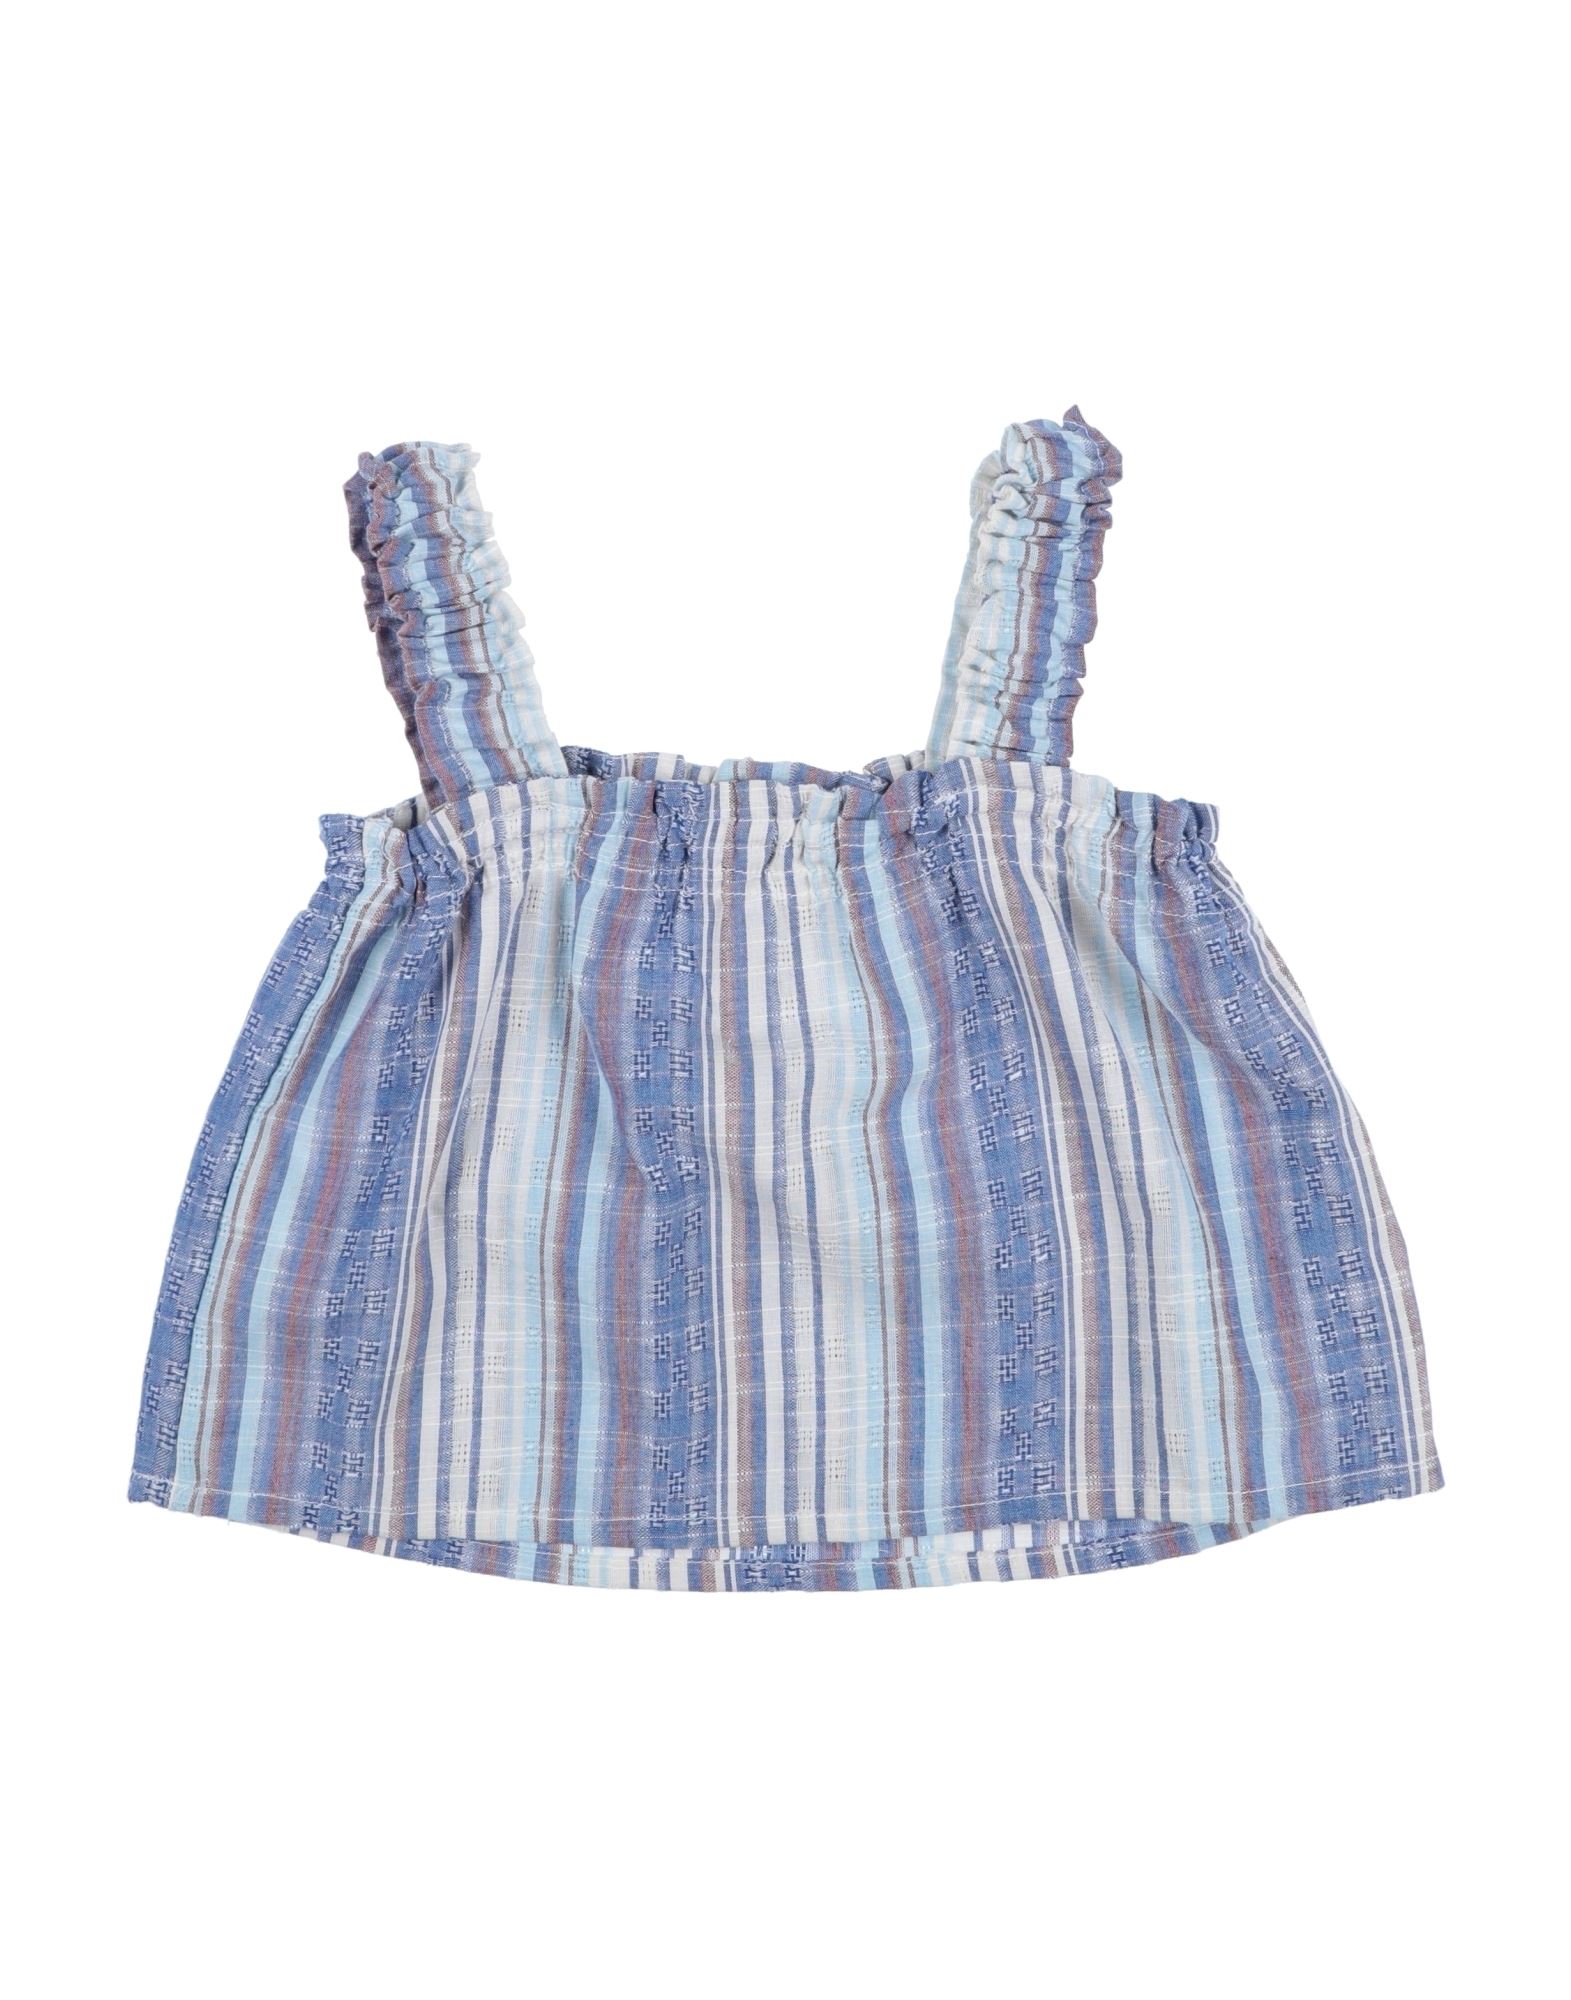 ONLY & SONS Top Kinder Lila von ONLY & SONS